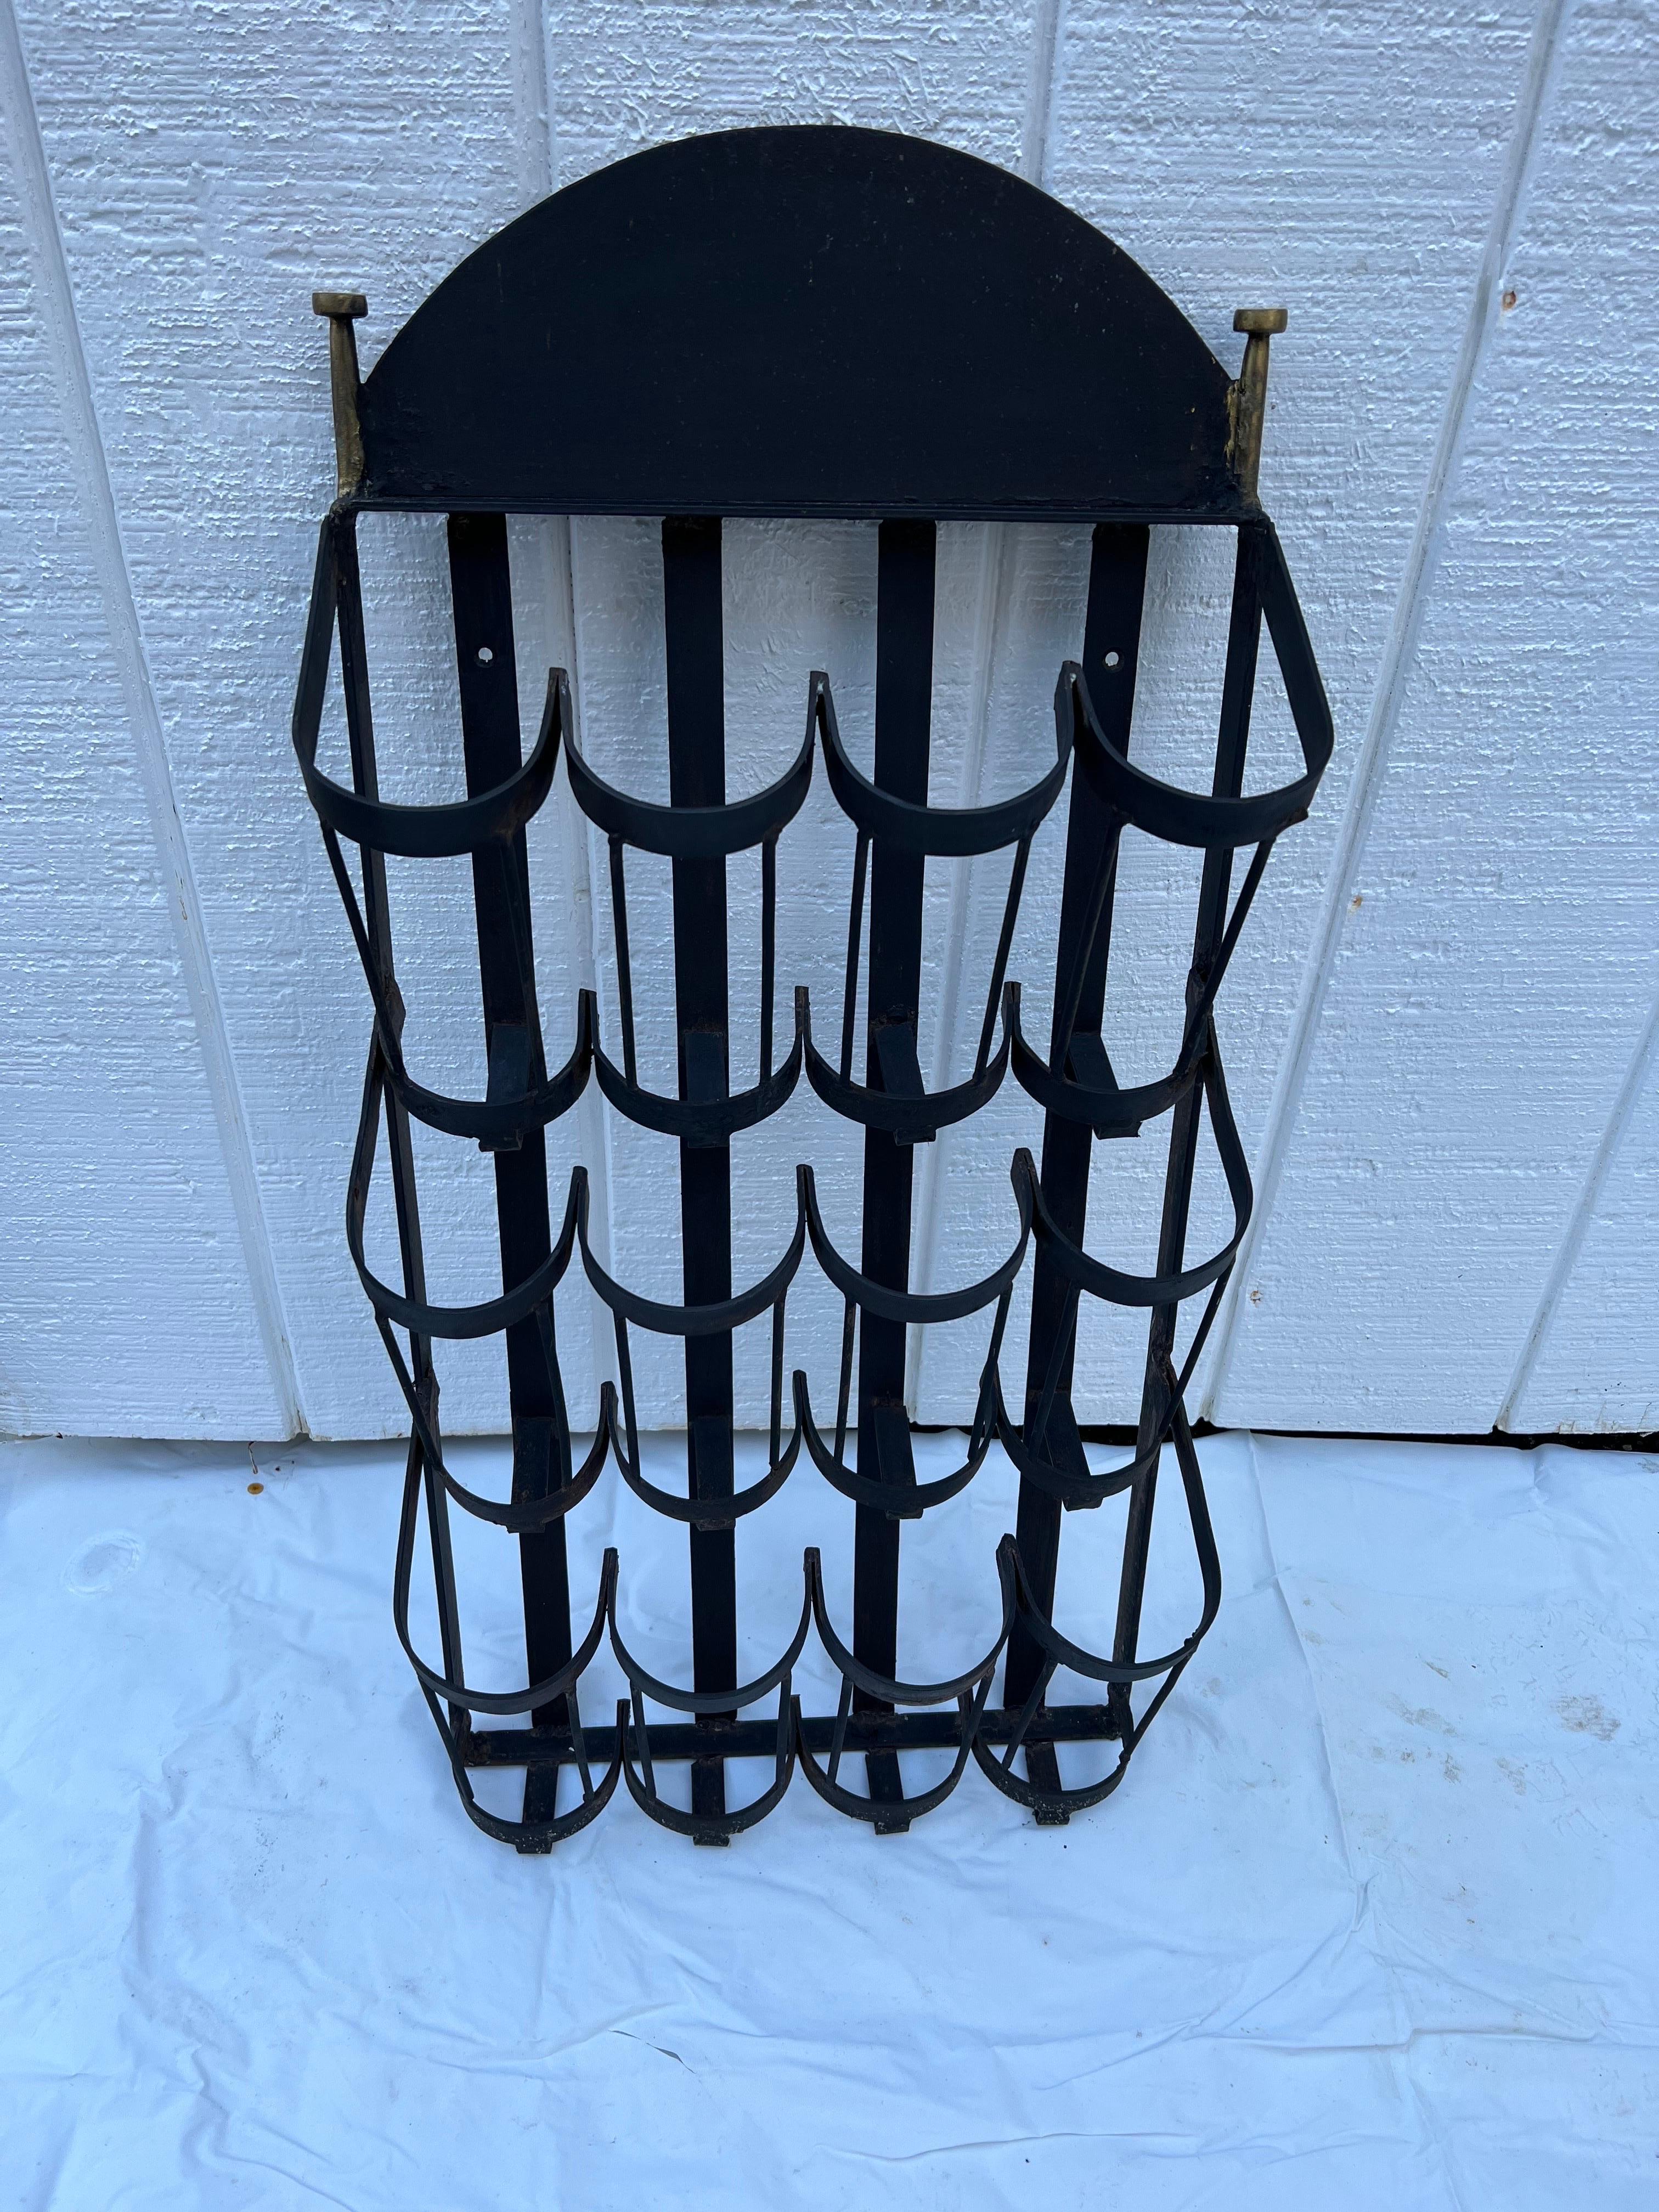 Wrought Iron wall mount wine bottle holder. Holds 12 bottles total. Perfect for that rustic barn home or modern penthouse. Great unique gift for that sommelier , home made wine maker , or just wine lover in general. There are two holes for screws to